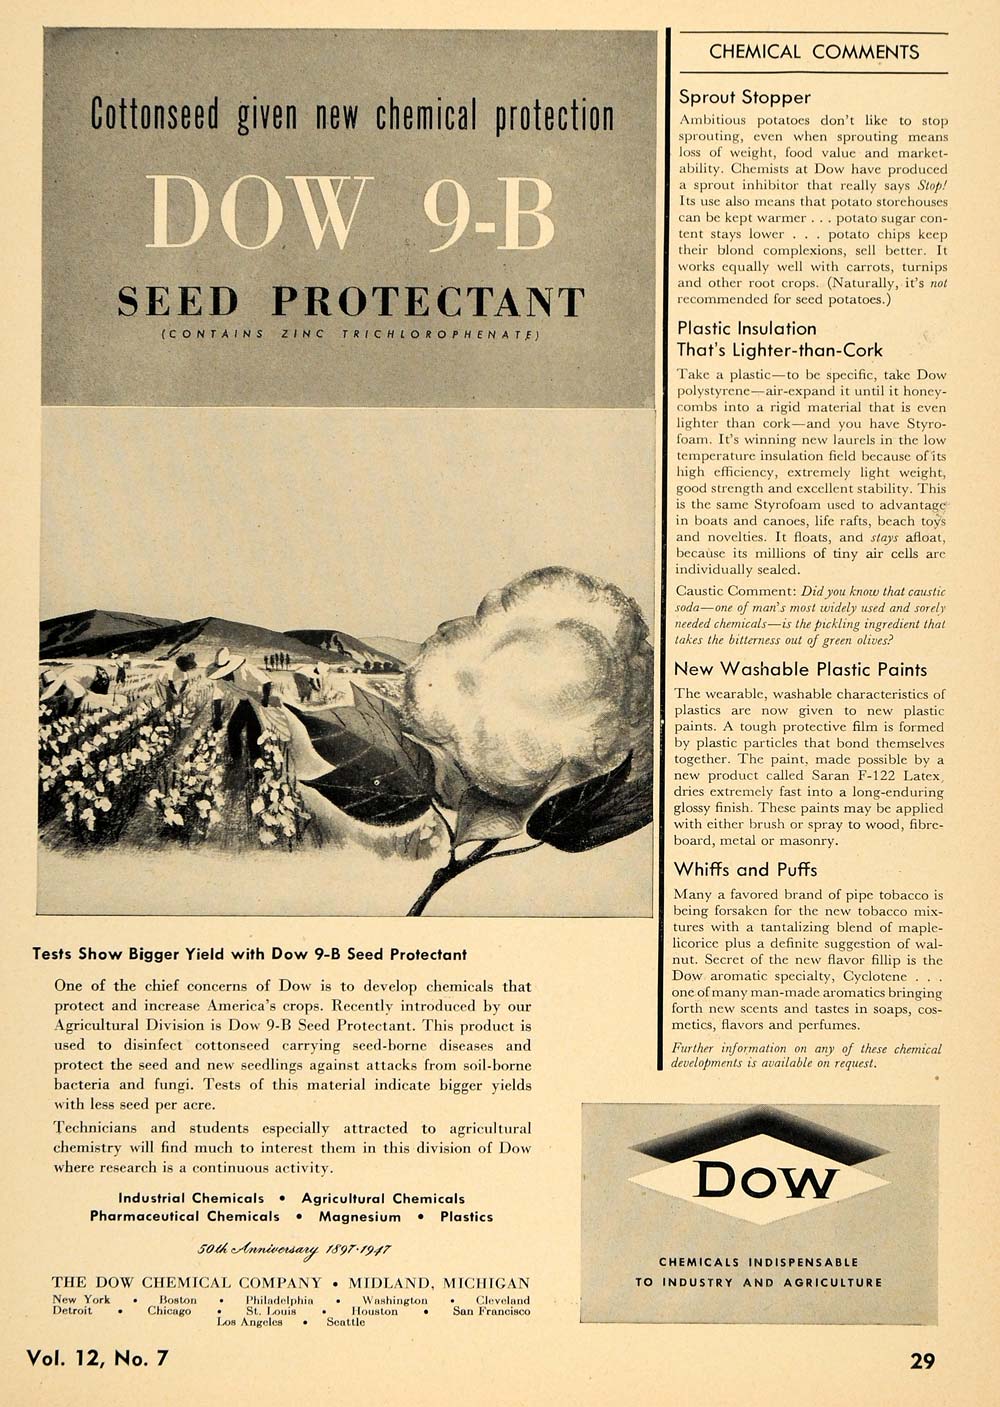 1947 Ad Dow Chemical 9-B Seed Protectant Cotton Field - ORIGINAL TCE1